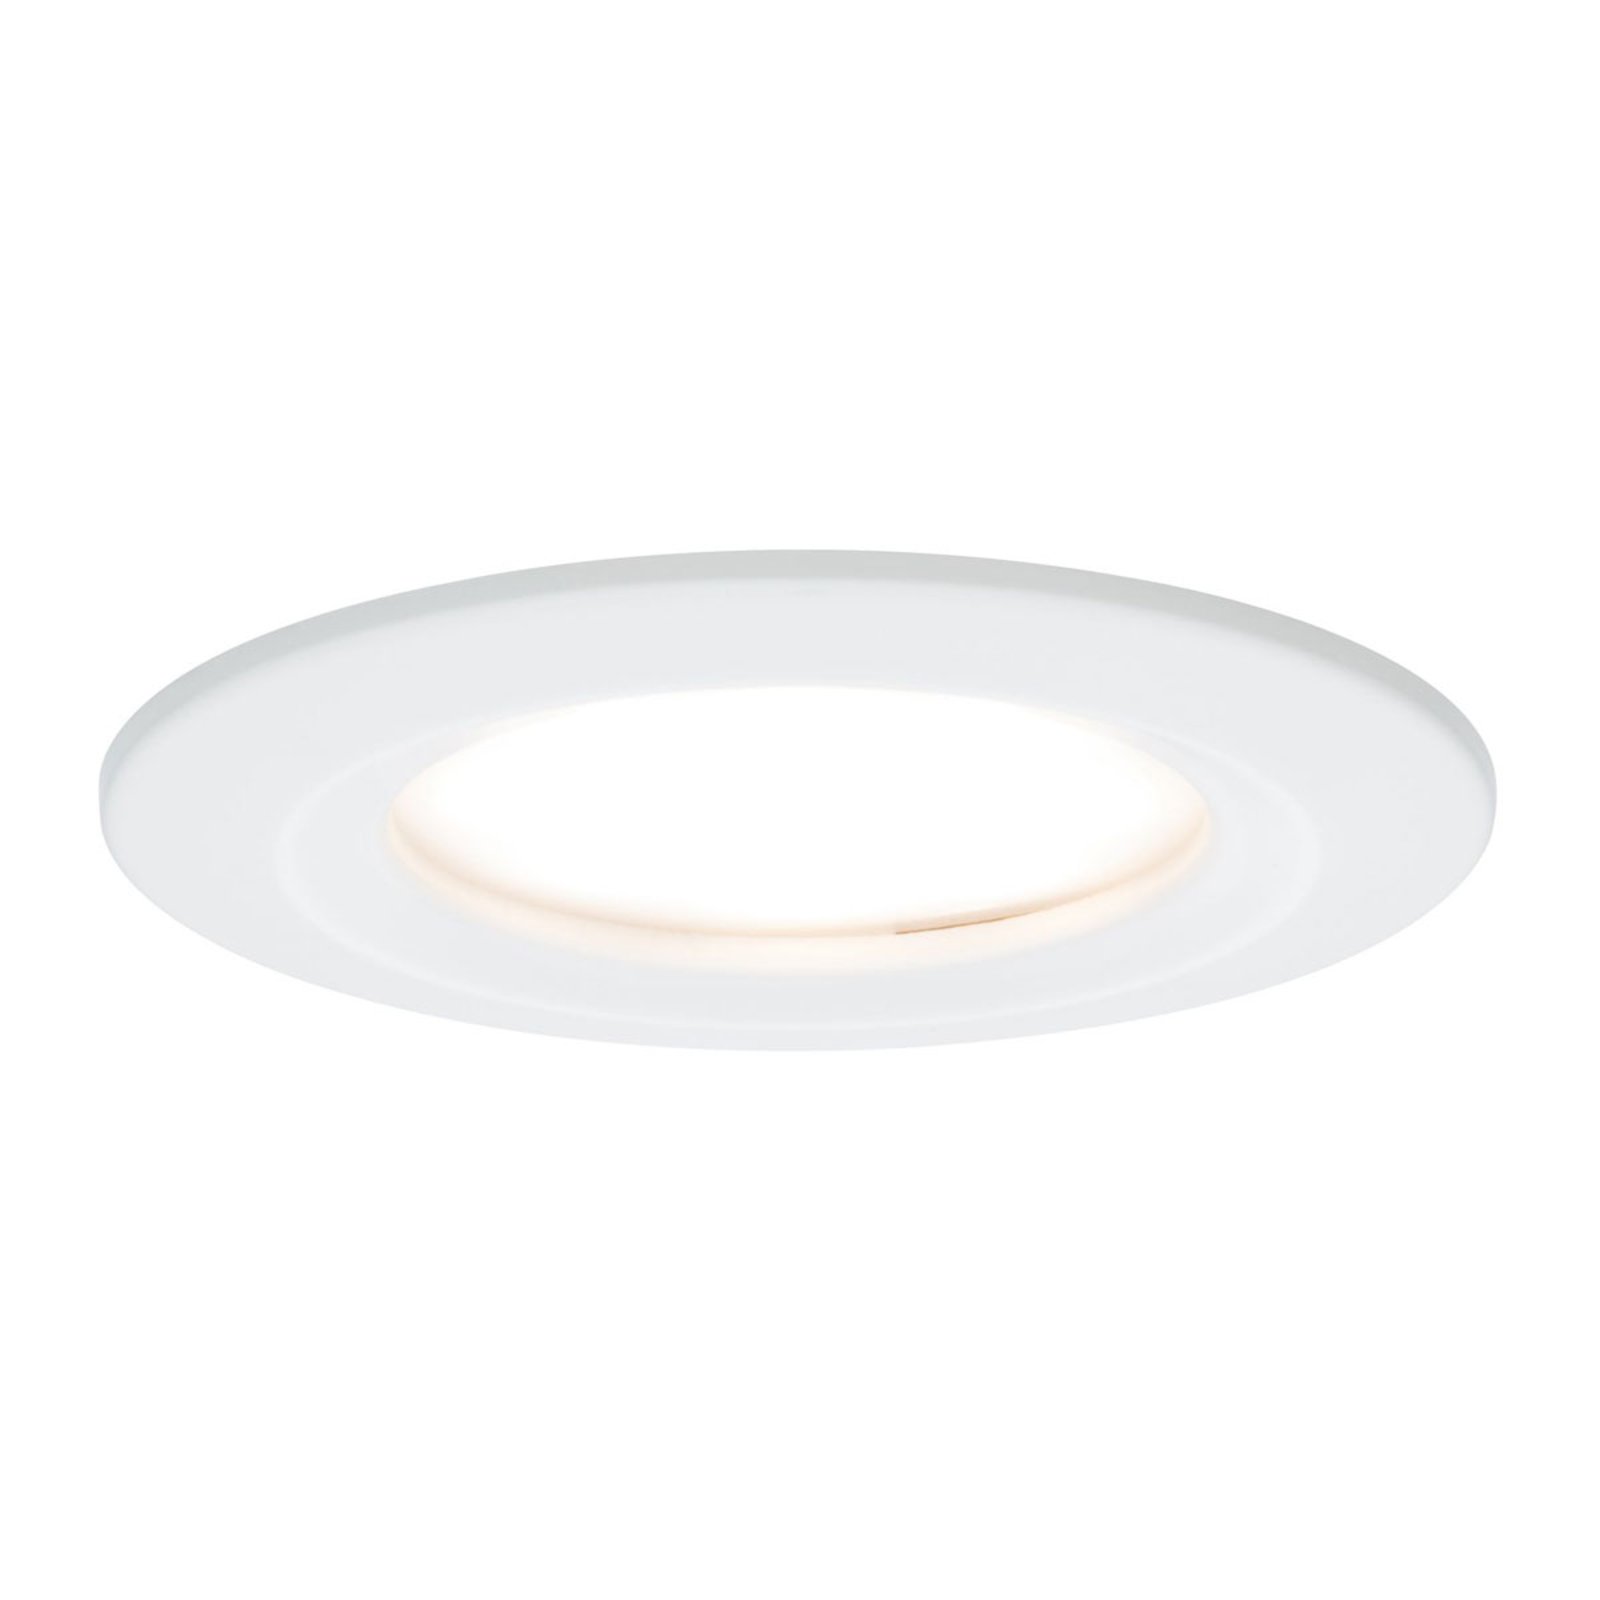 Paulmann σετ 3 προβολέων LED Slim Coin, dimmable, λευκό